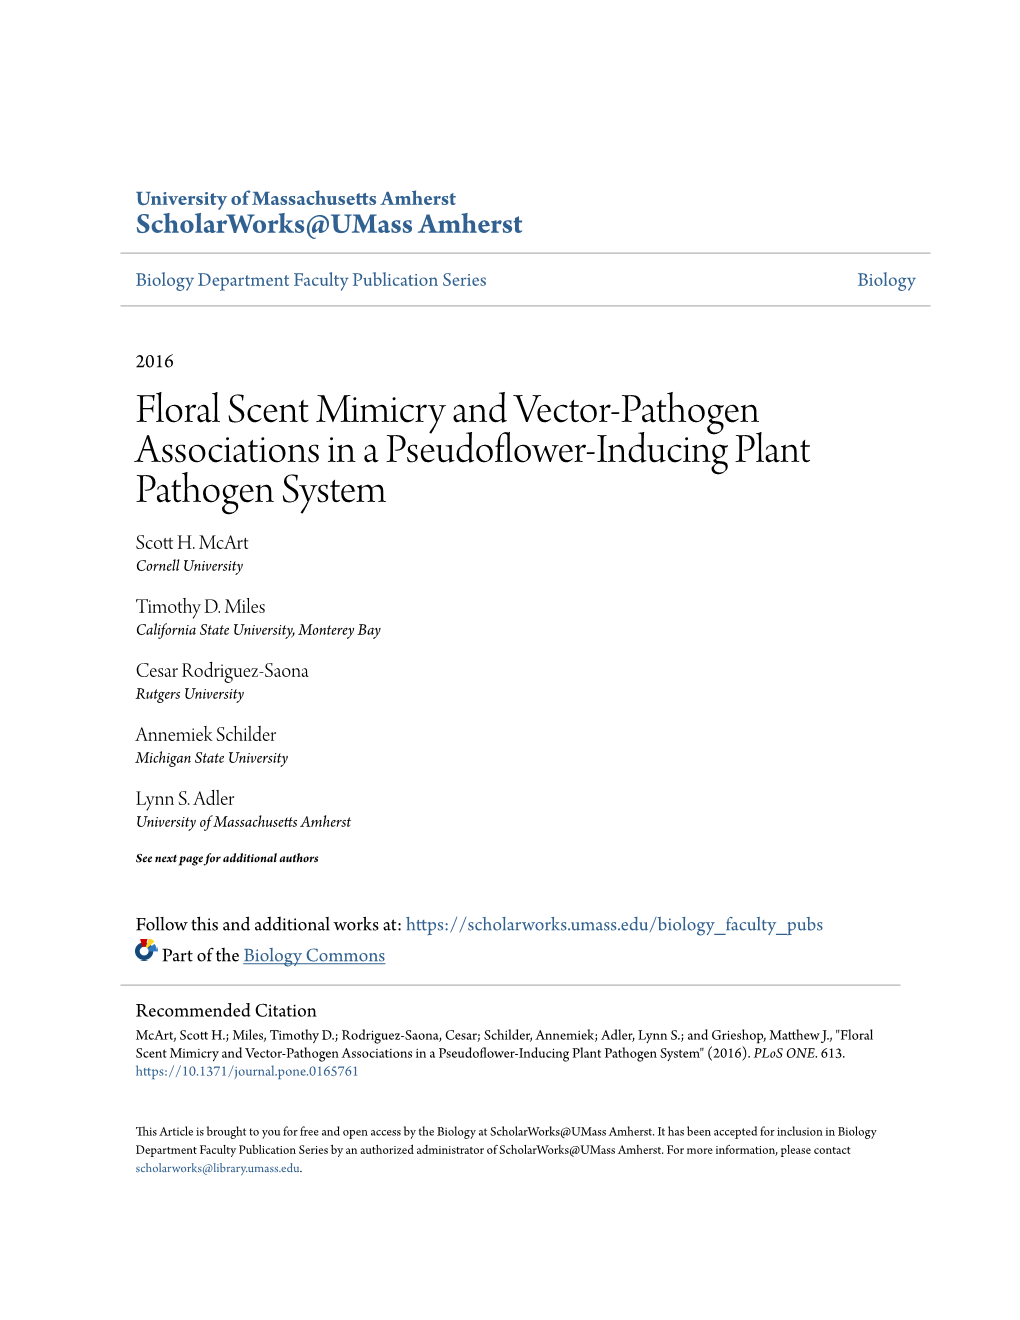 Floral Scent Mimicry and Vector-Pathogen Associations in a Pseudoflower-Inducing Plant Pathogen System Scott H